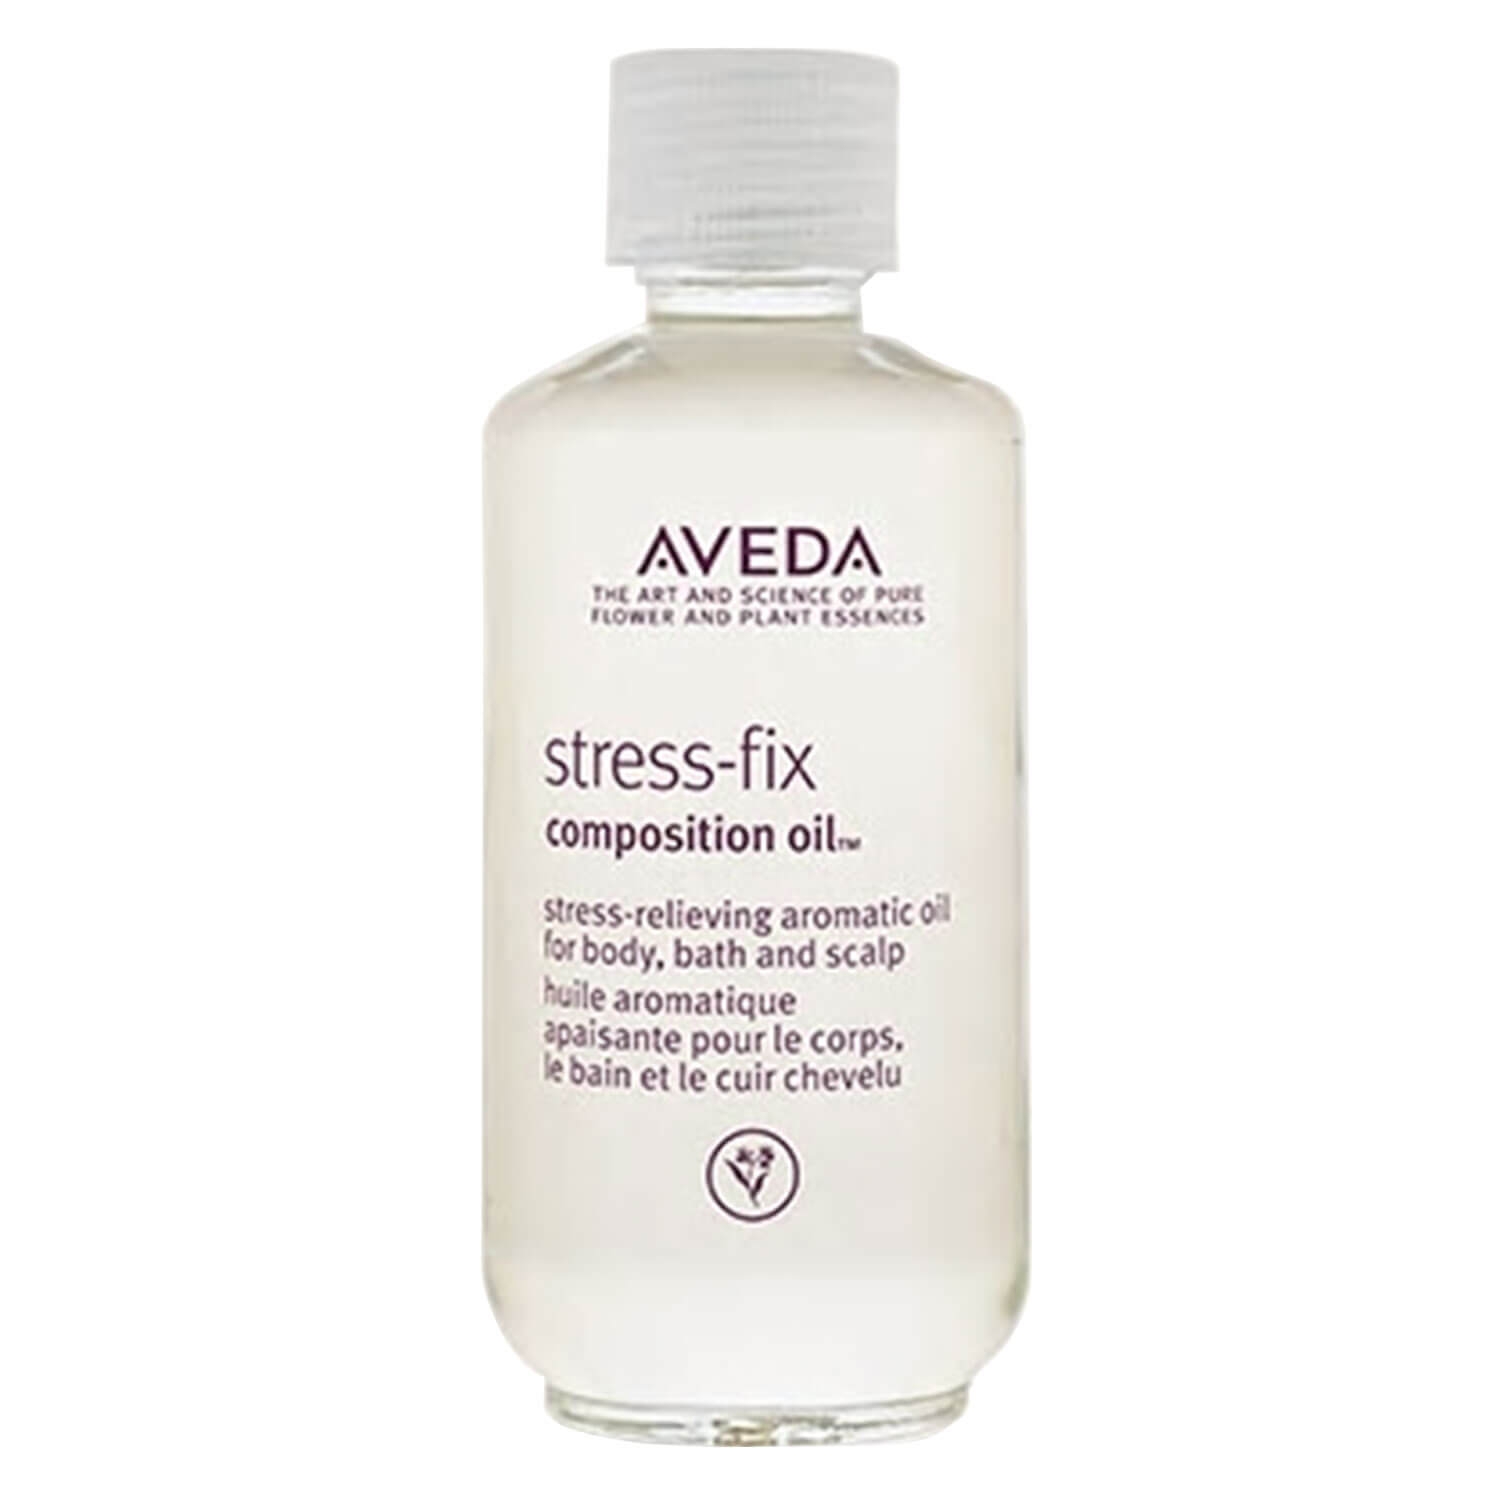 Product image from stress-fix - composition oil